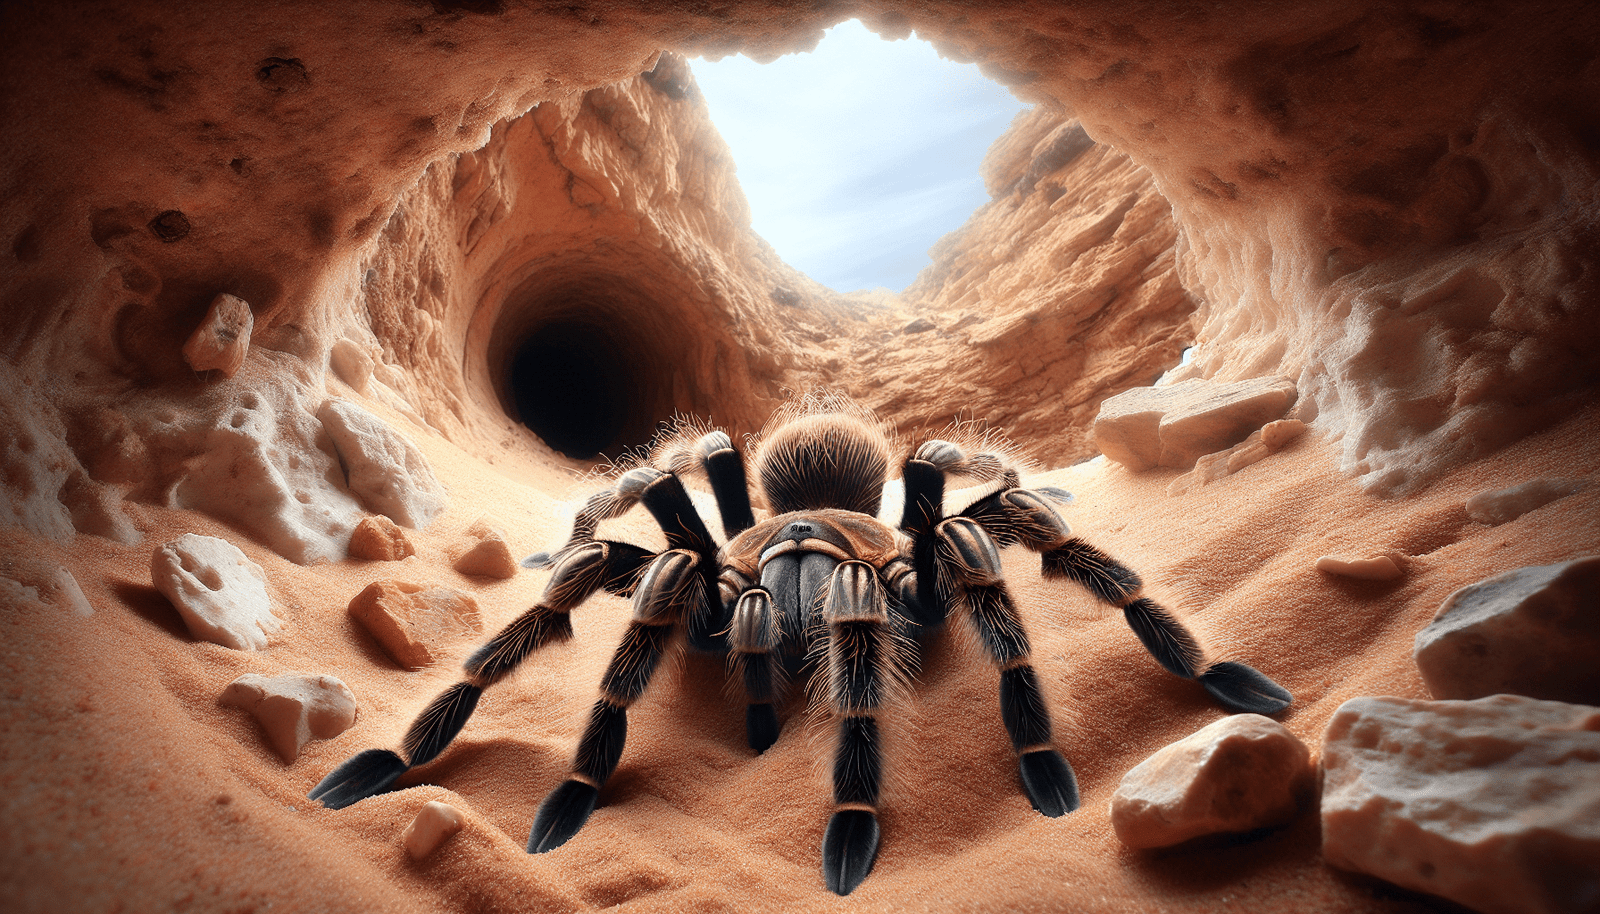 How Do Tarantulas Cope With Threats From Other Burrowing Animals In Their Habitats?